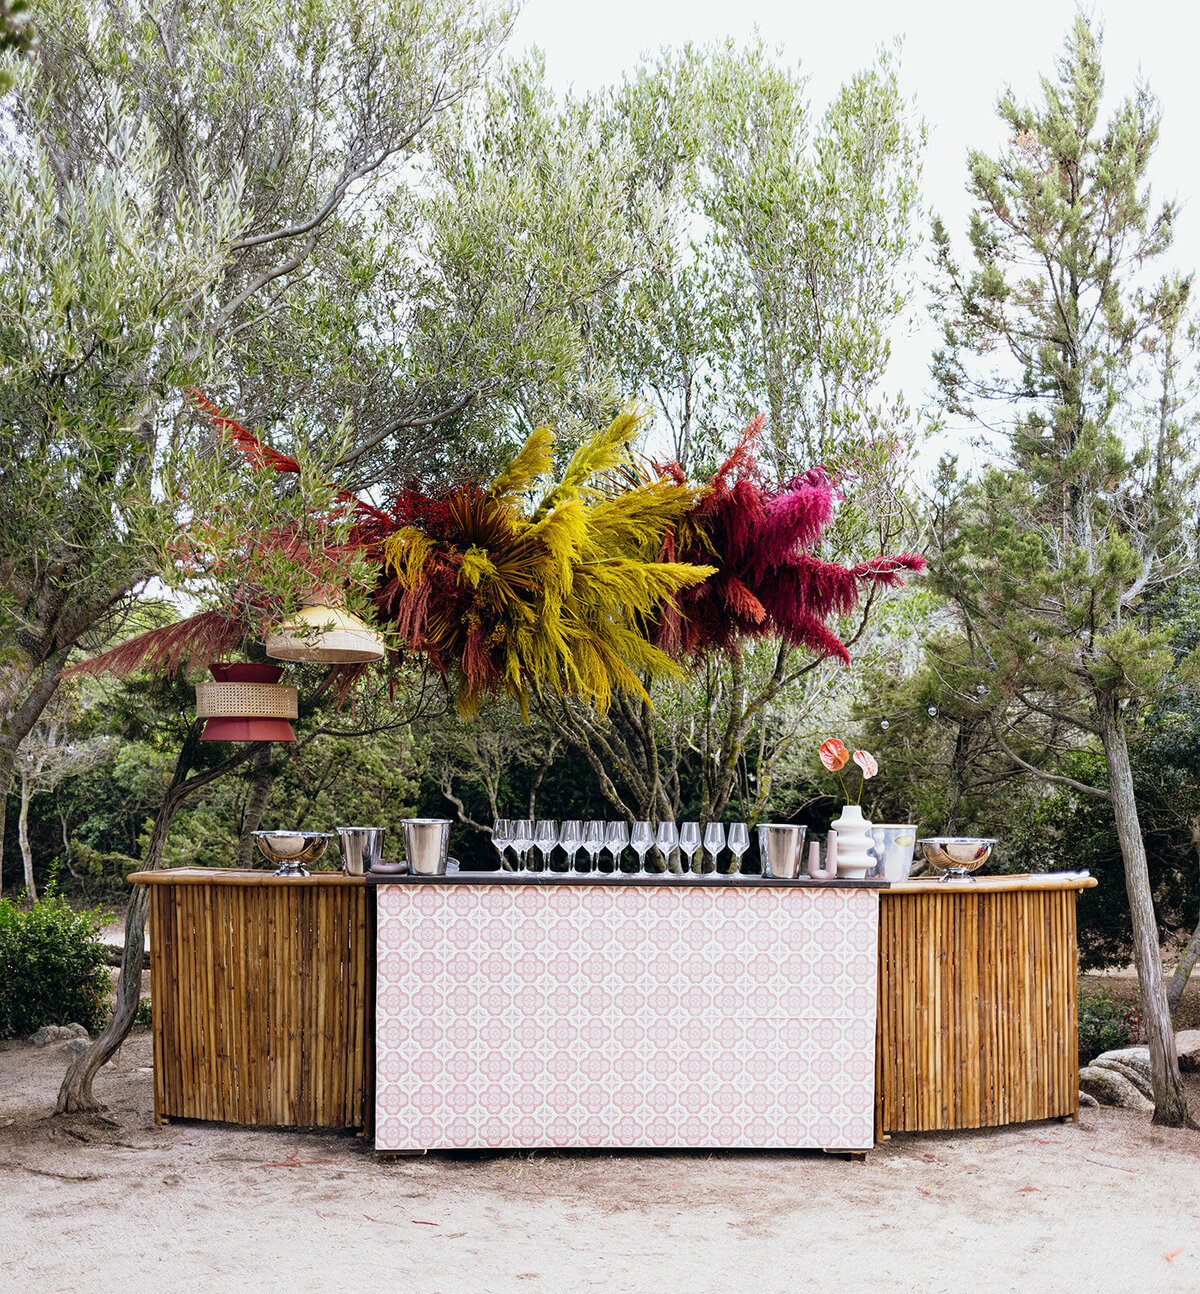 Retro 70s Bar Station with Colourful and Extravagant Flowers for wedding